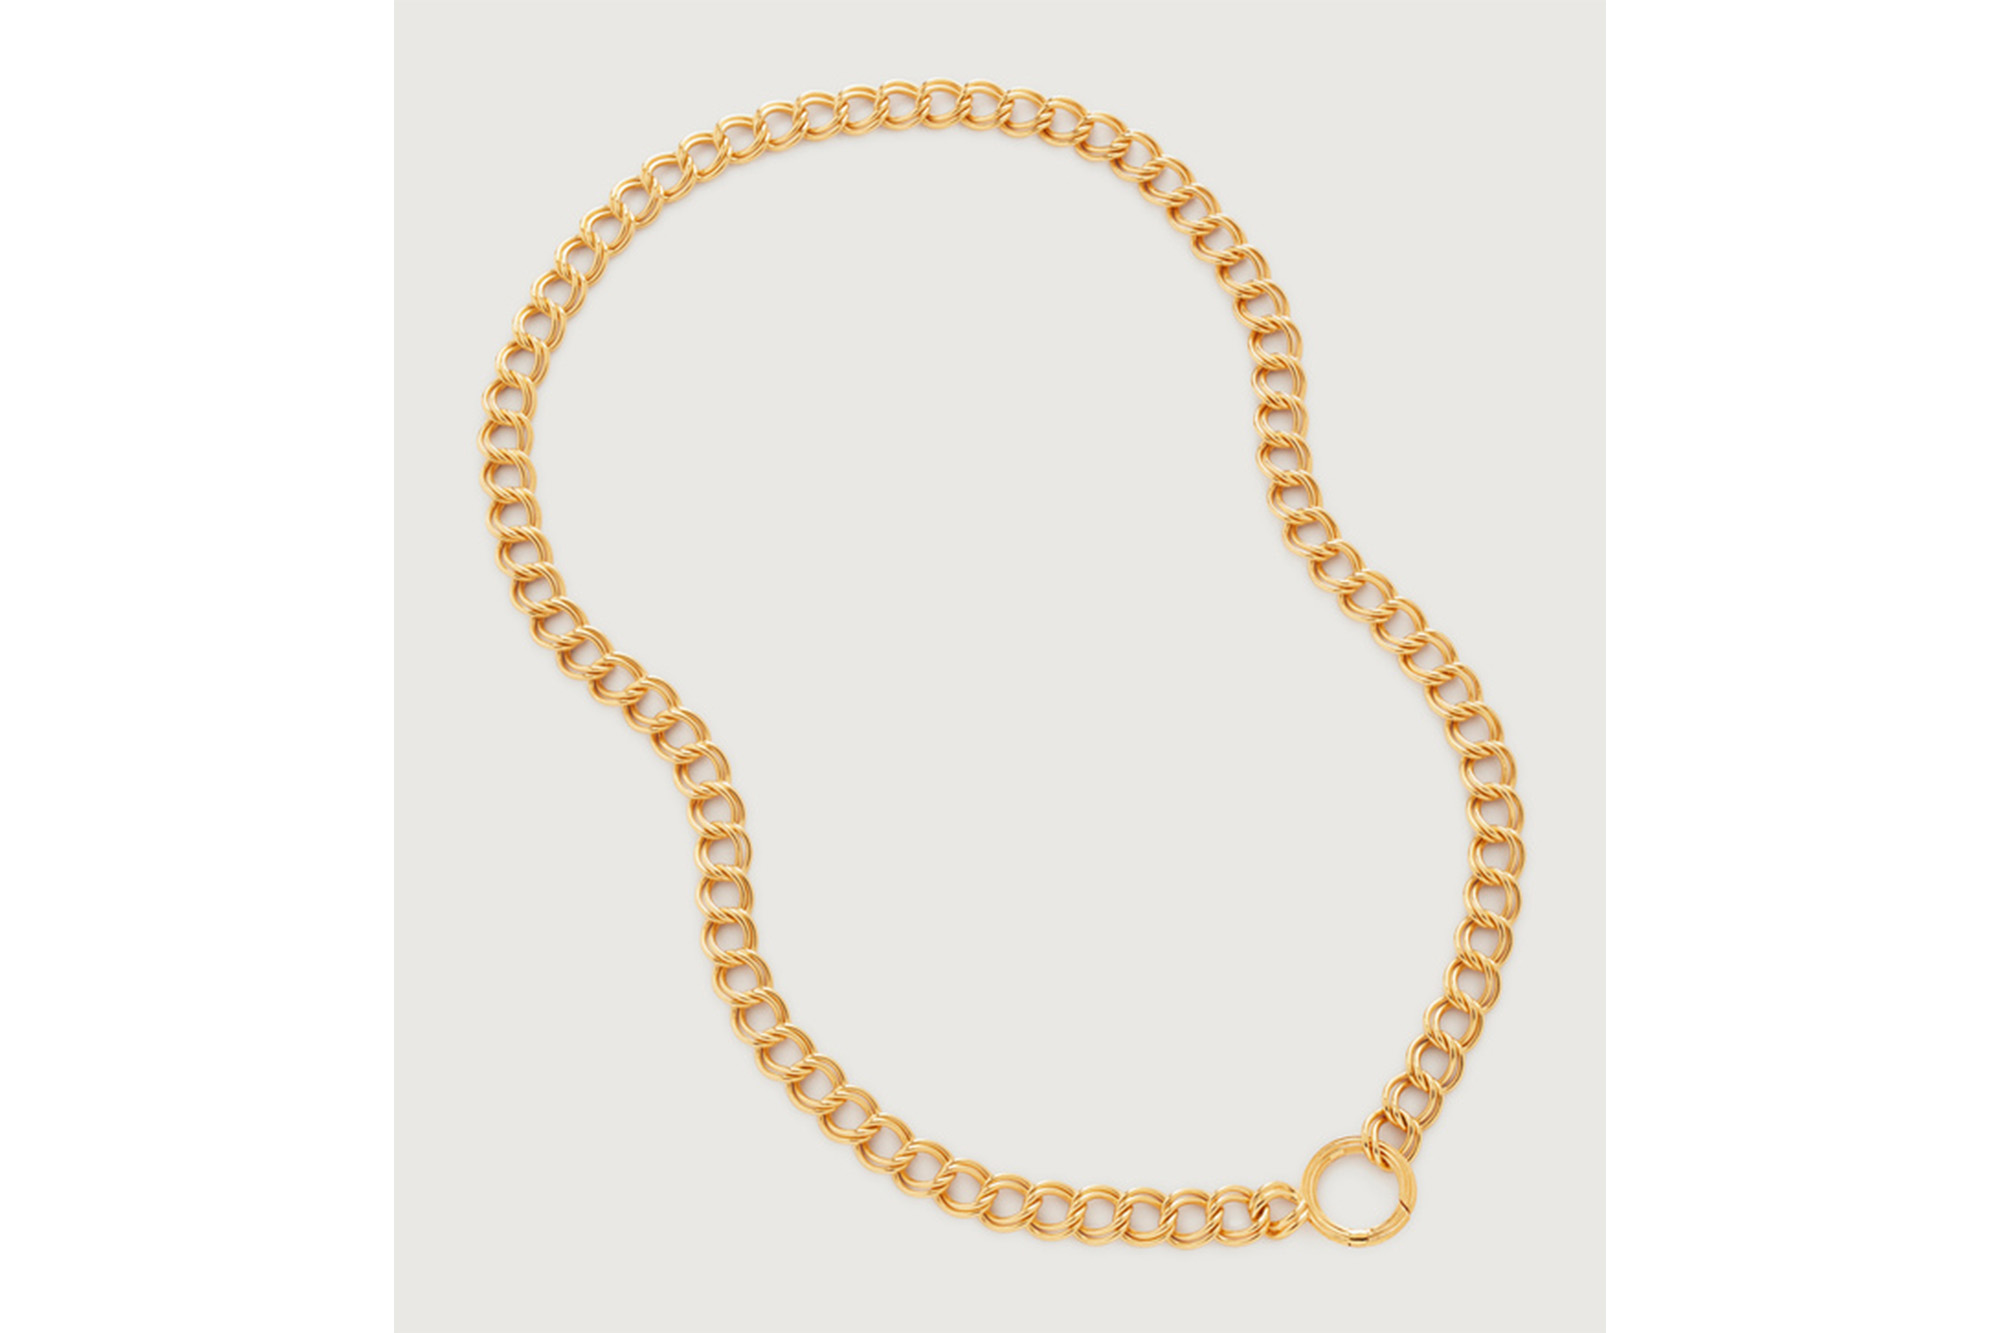 A gold necklace